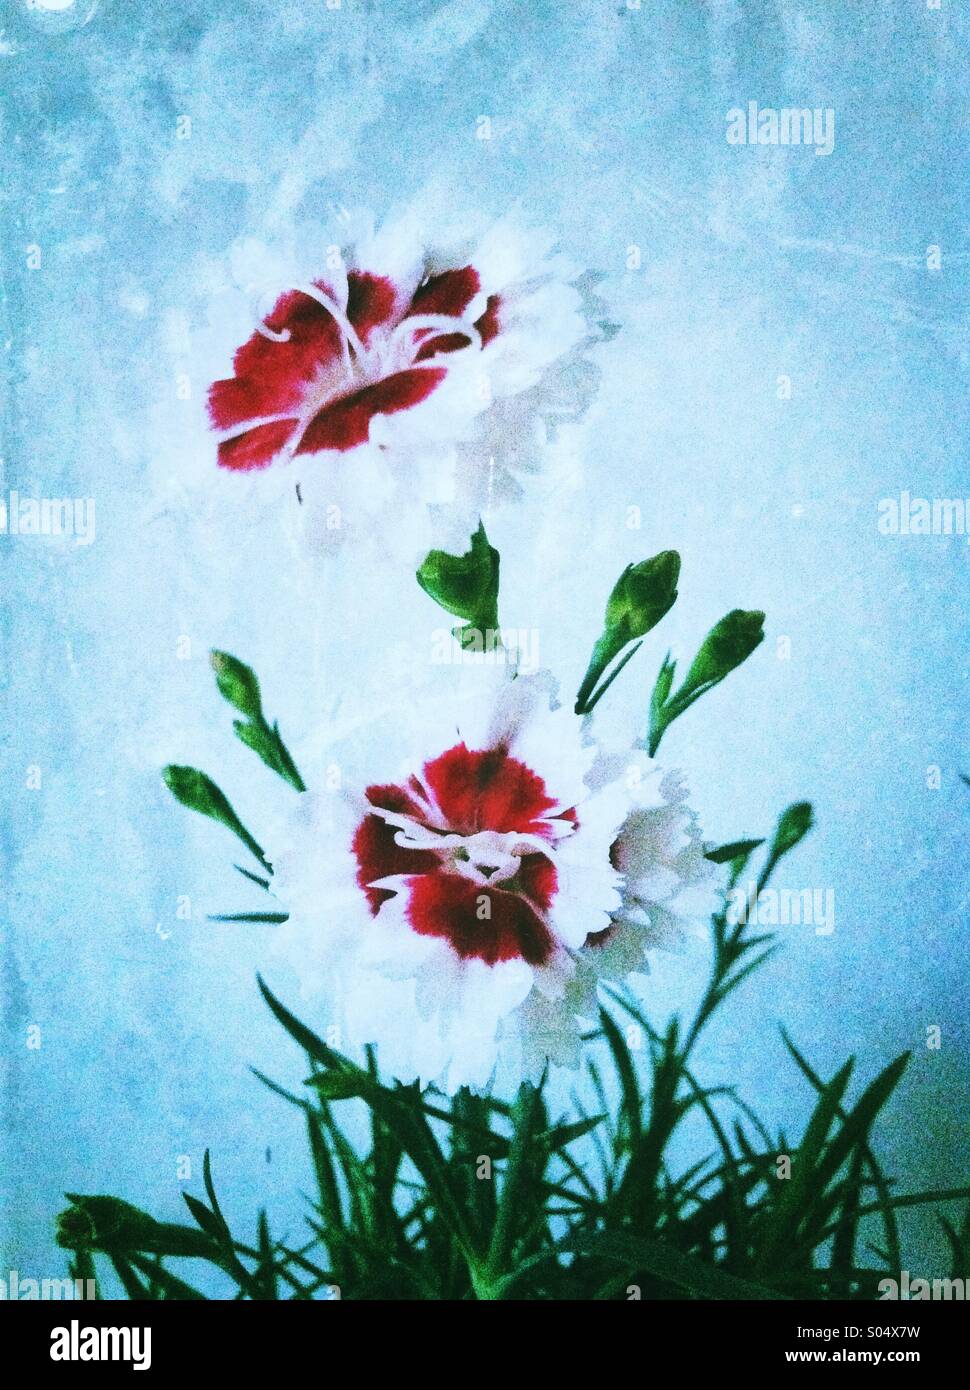 Red white dianthus flowers Stock Photo